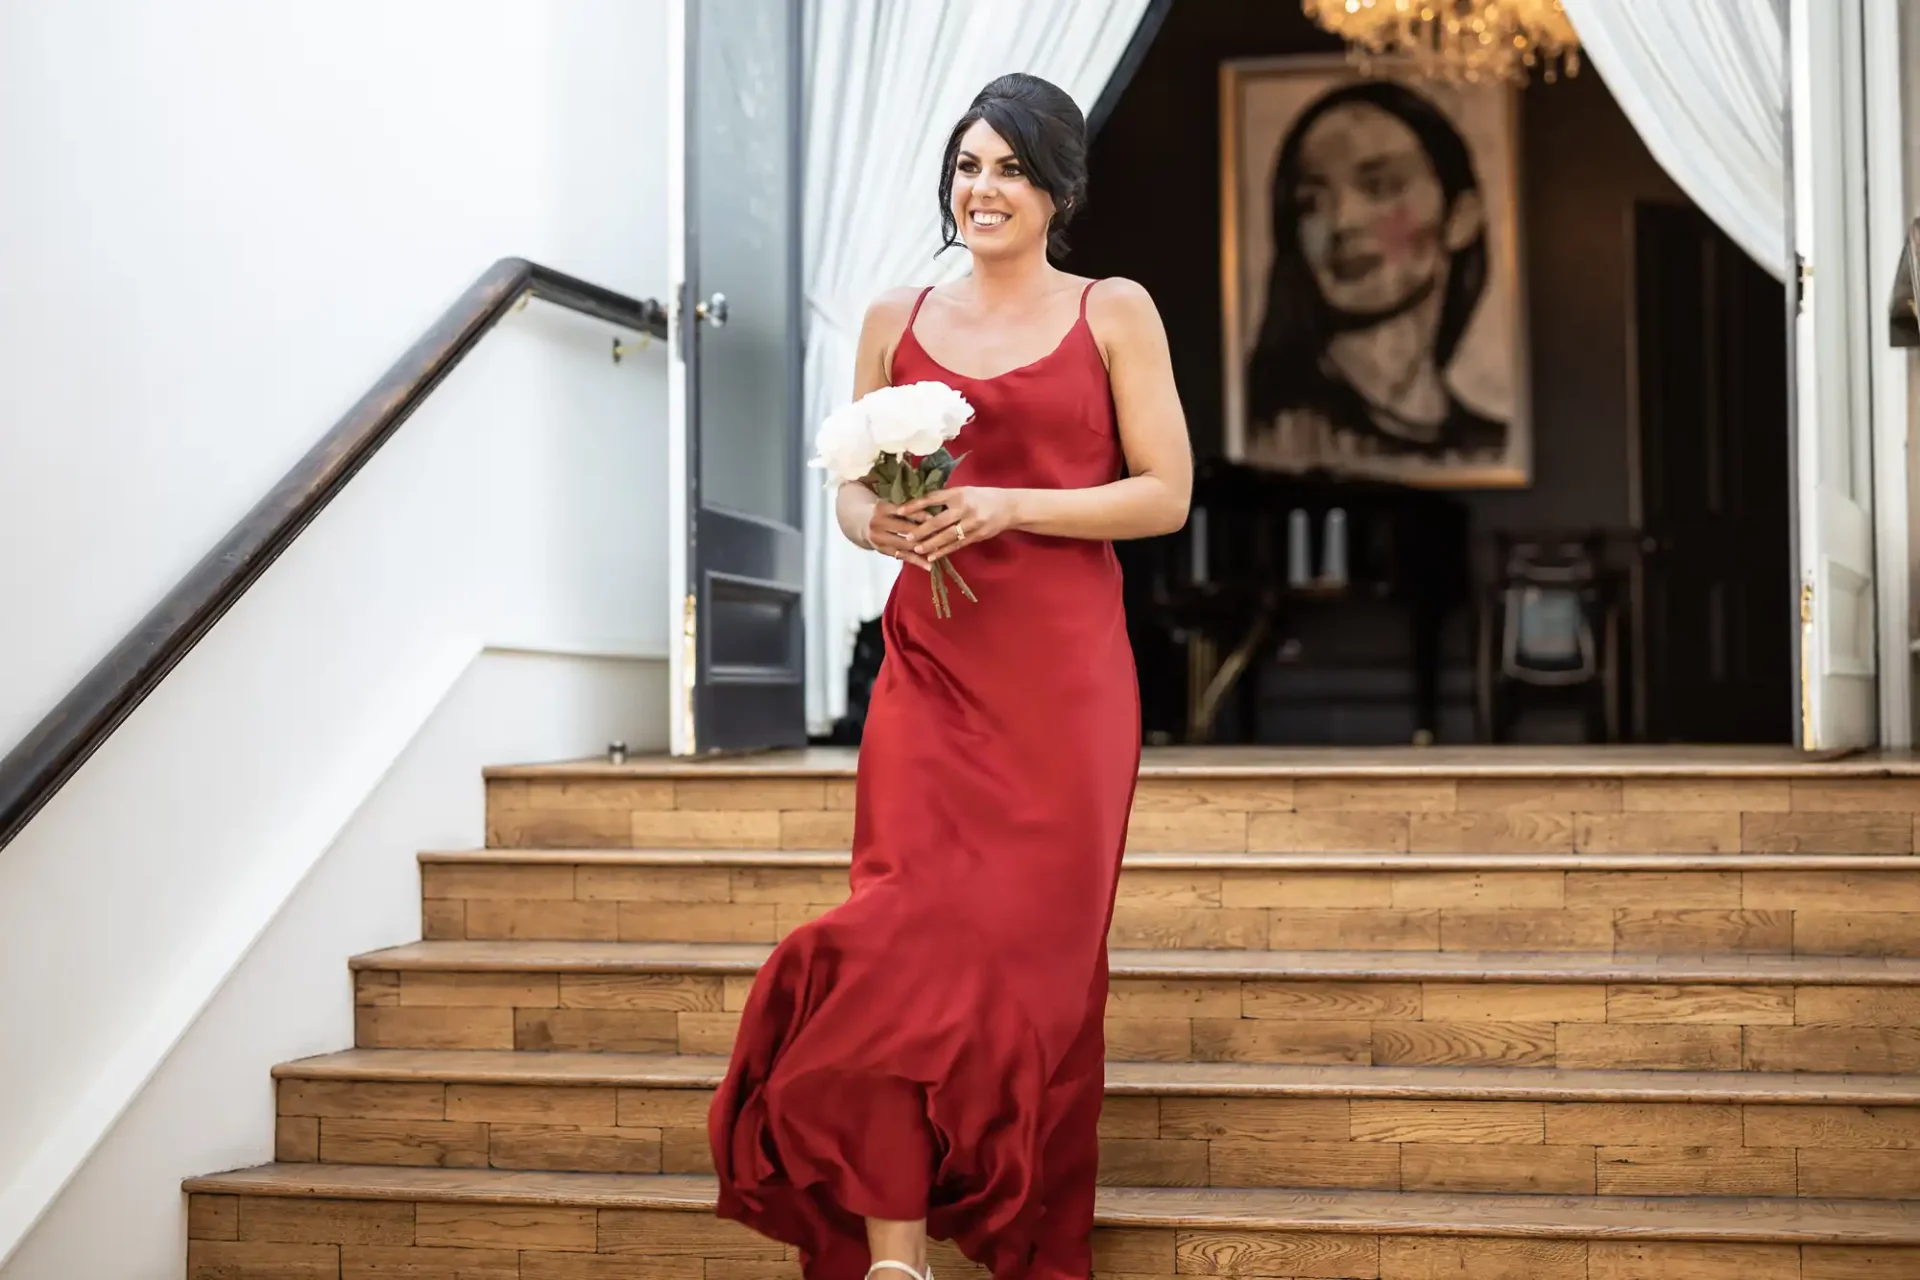 A woman in a red dress smiling as she descends a staircase, holding a bouquet, with a portrait in the background.